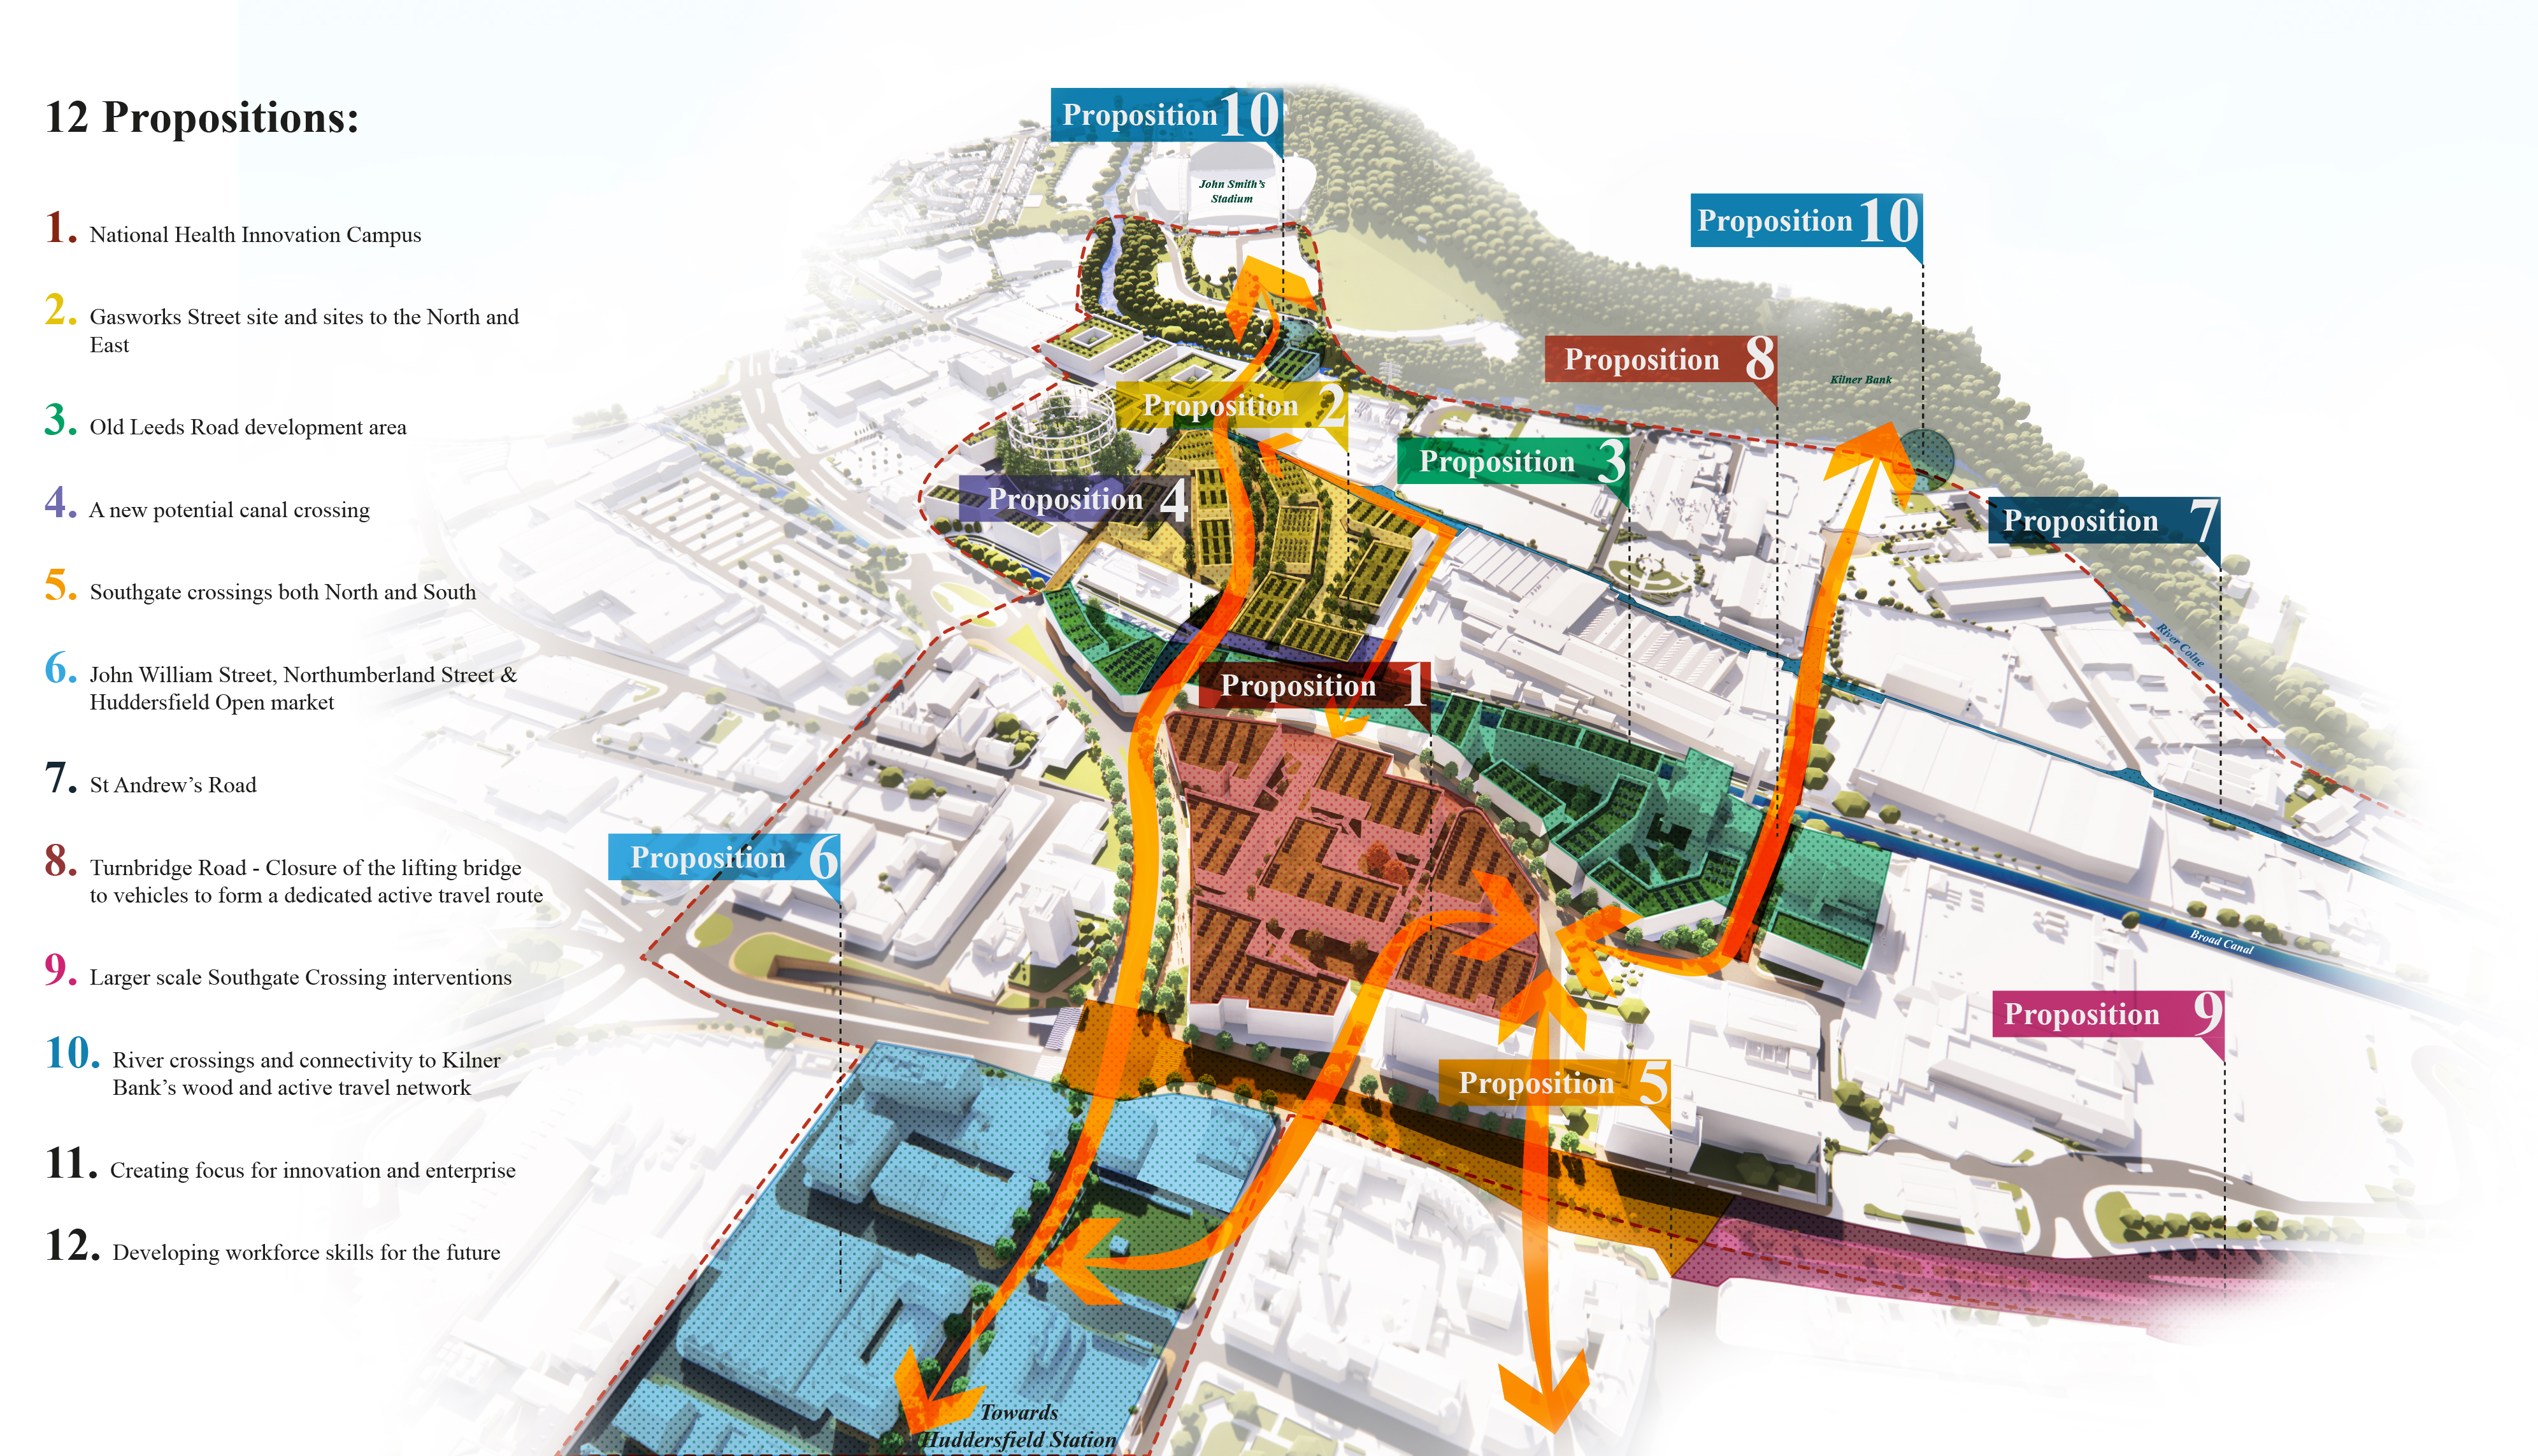 Master plan of the station to stadium corridor, showing diffrent areas with propositions 